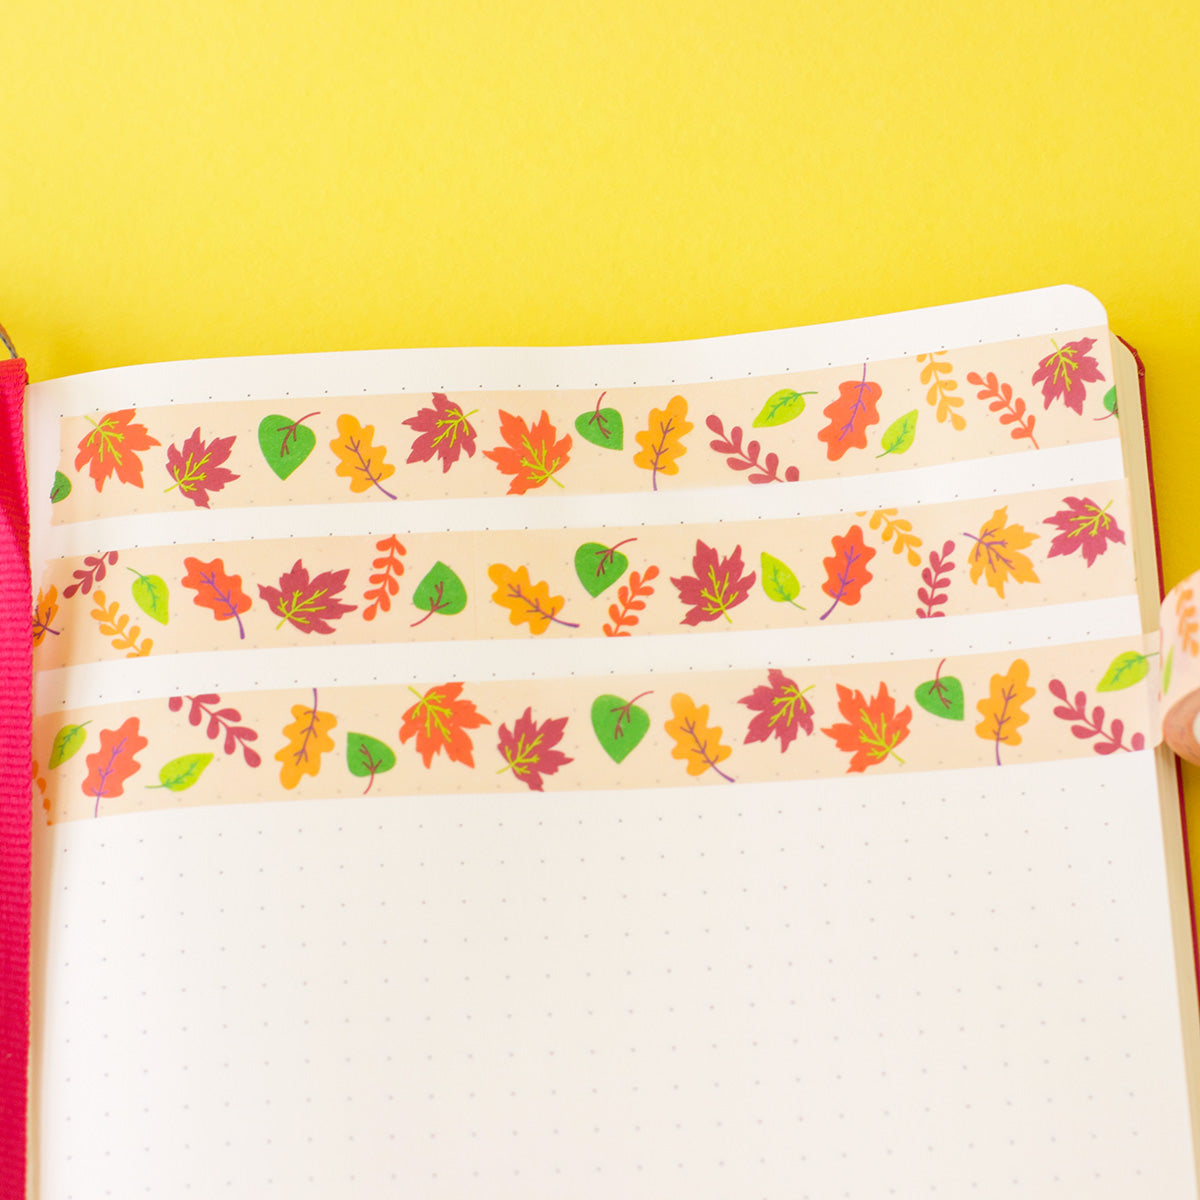 autumn leaves fall design washi tape in a bullet journal. designed by fizzi~jayne